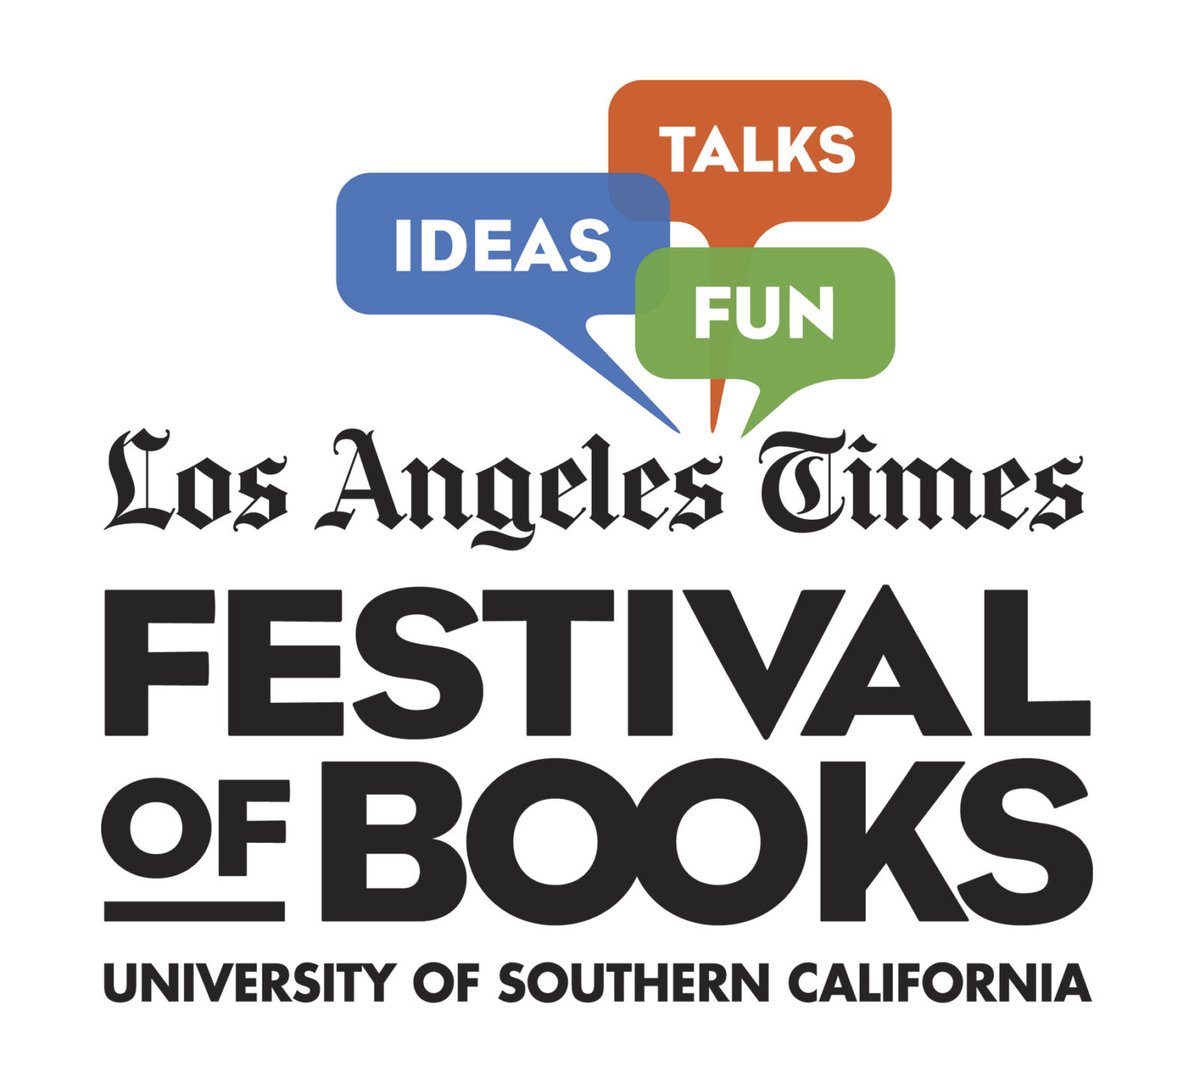 LA Times Festival of Books This Weekend, April 21-22, USC Campus—My First Book Signing!